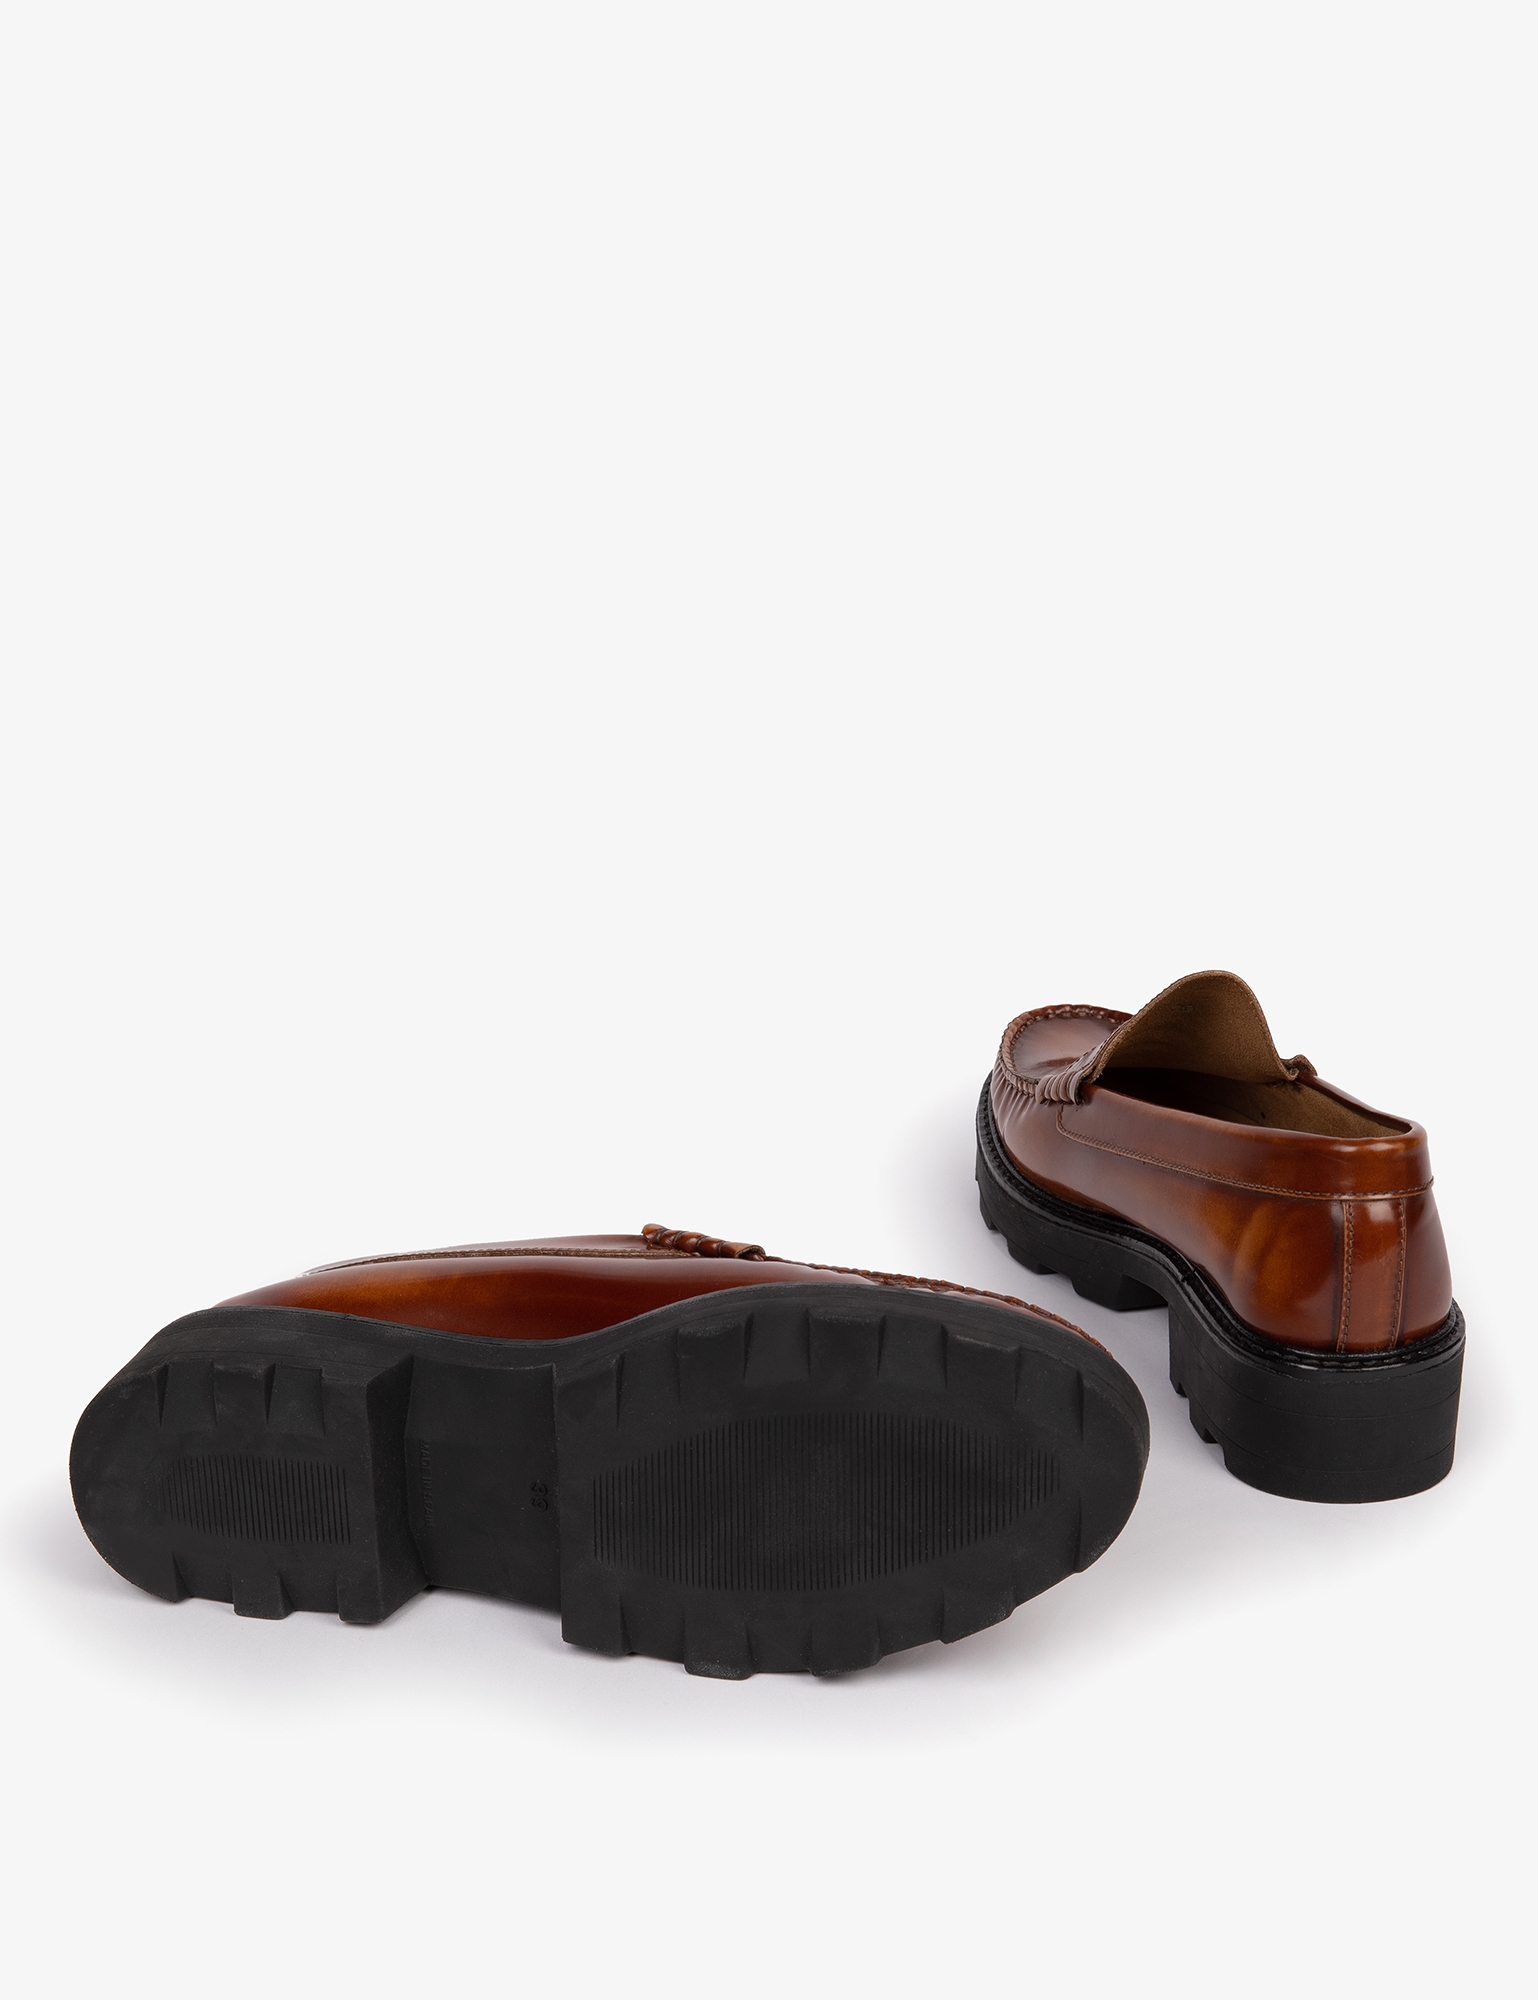 Idler Florentic Loafer - Toffee |Womens Loafer's | Penelope Chilvers